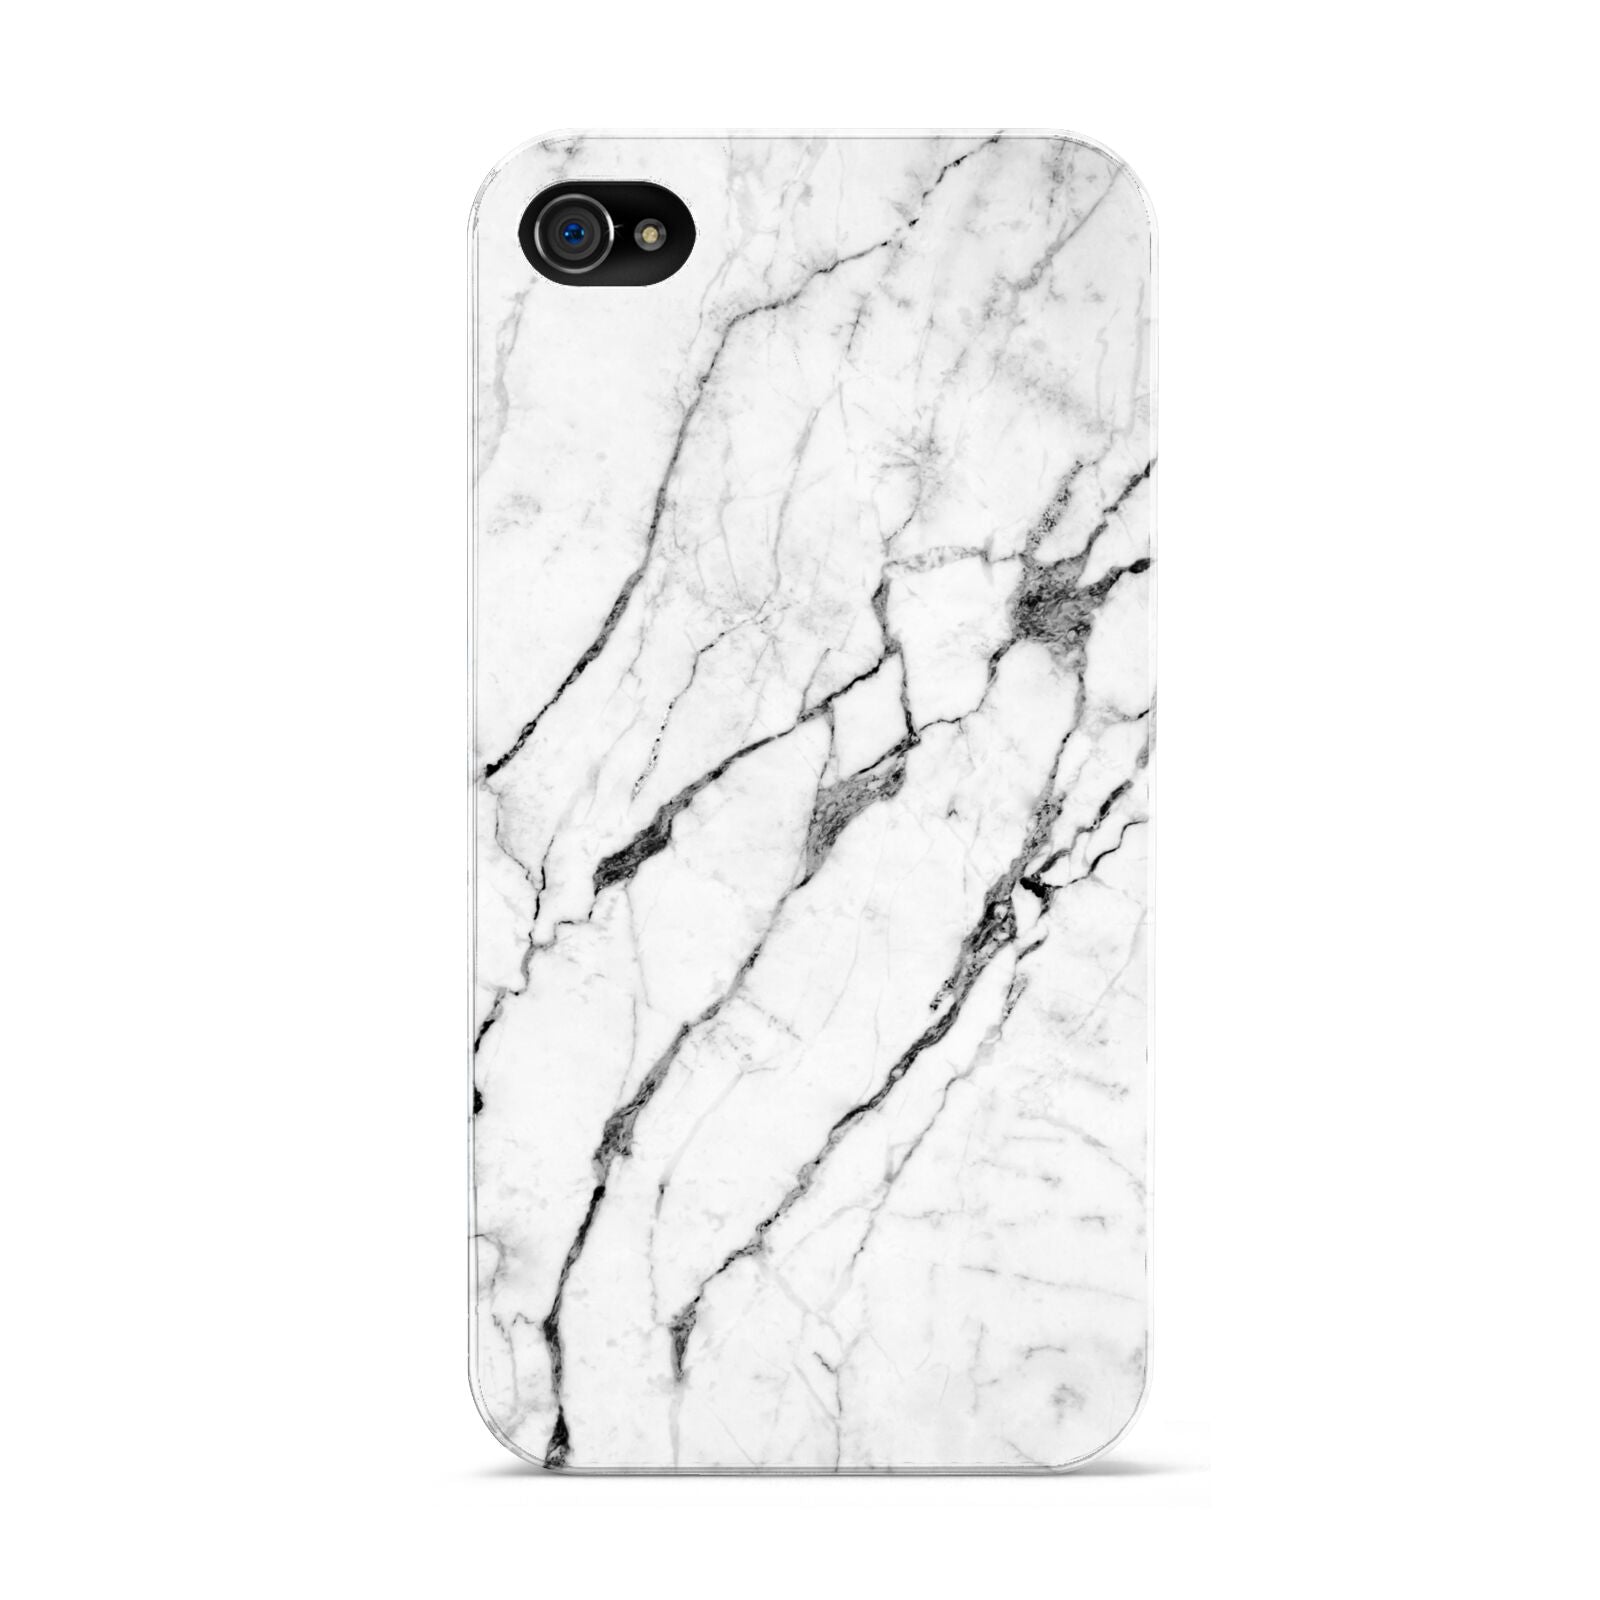 Marble White Apple iPhone 4s Case